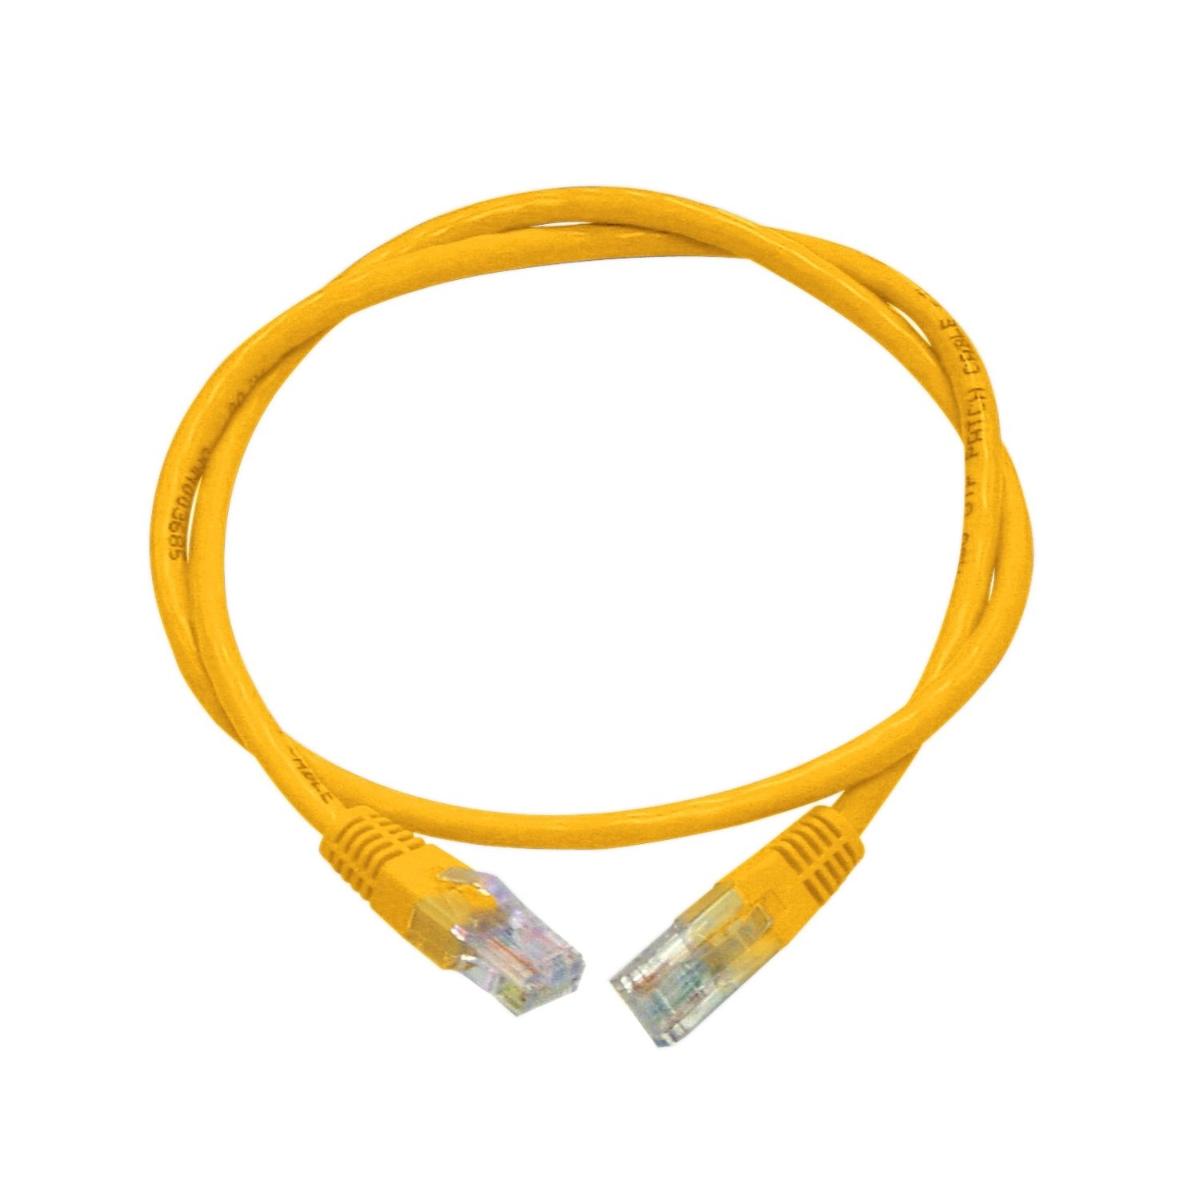 PATCHLEAD CAT5E UTP 5MTR YELLOW